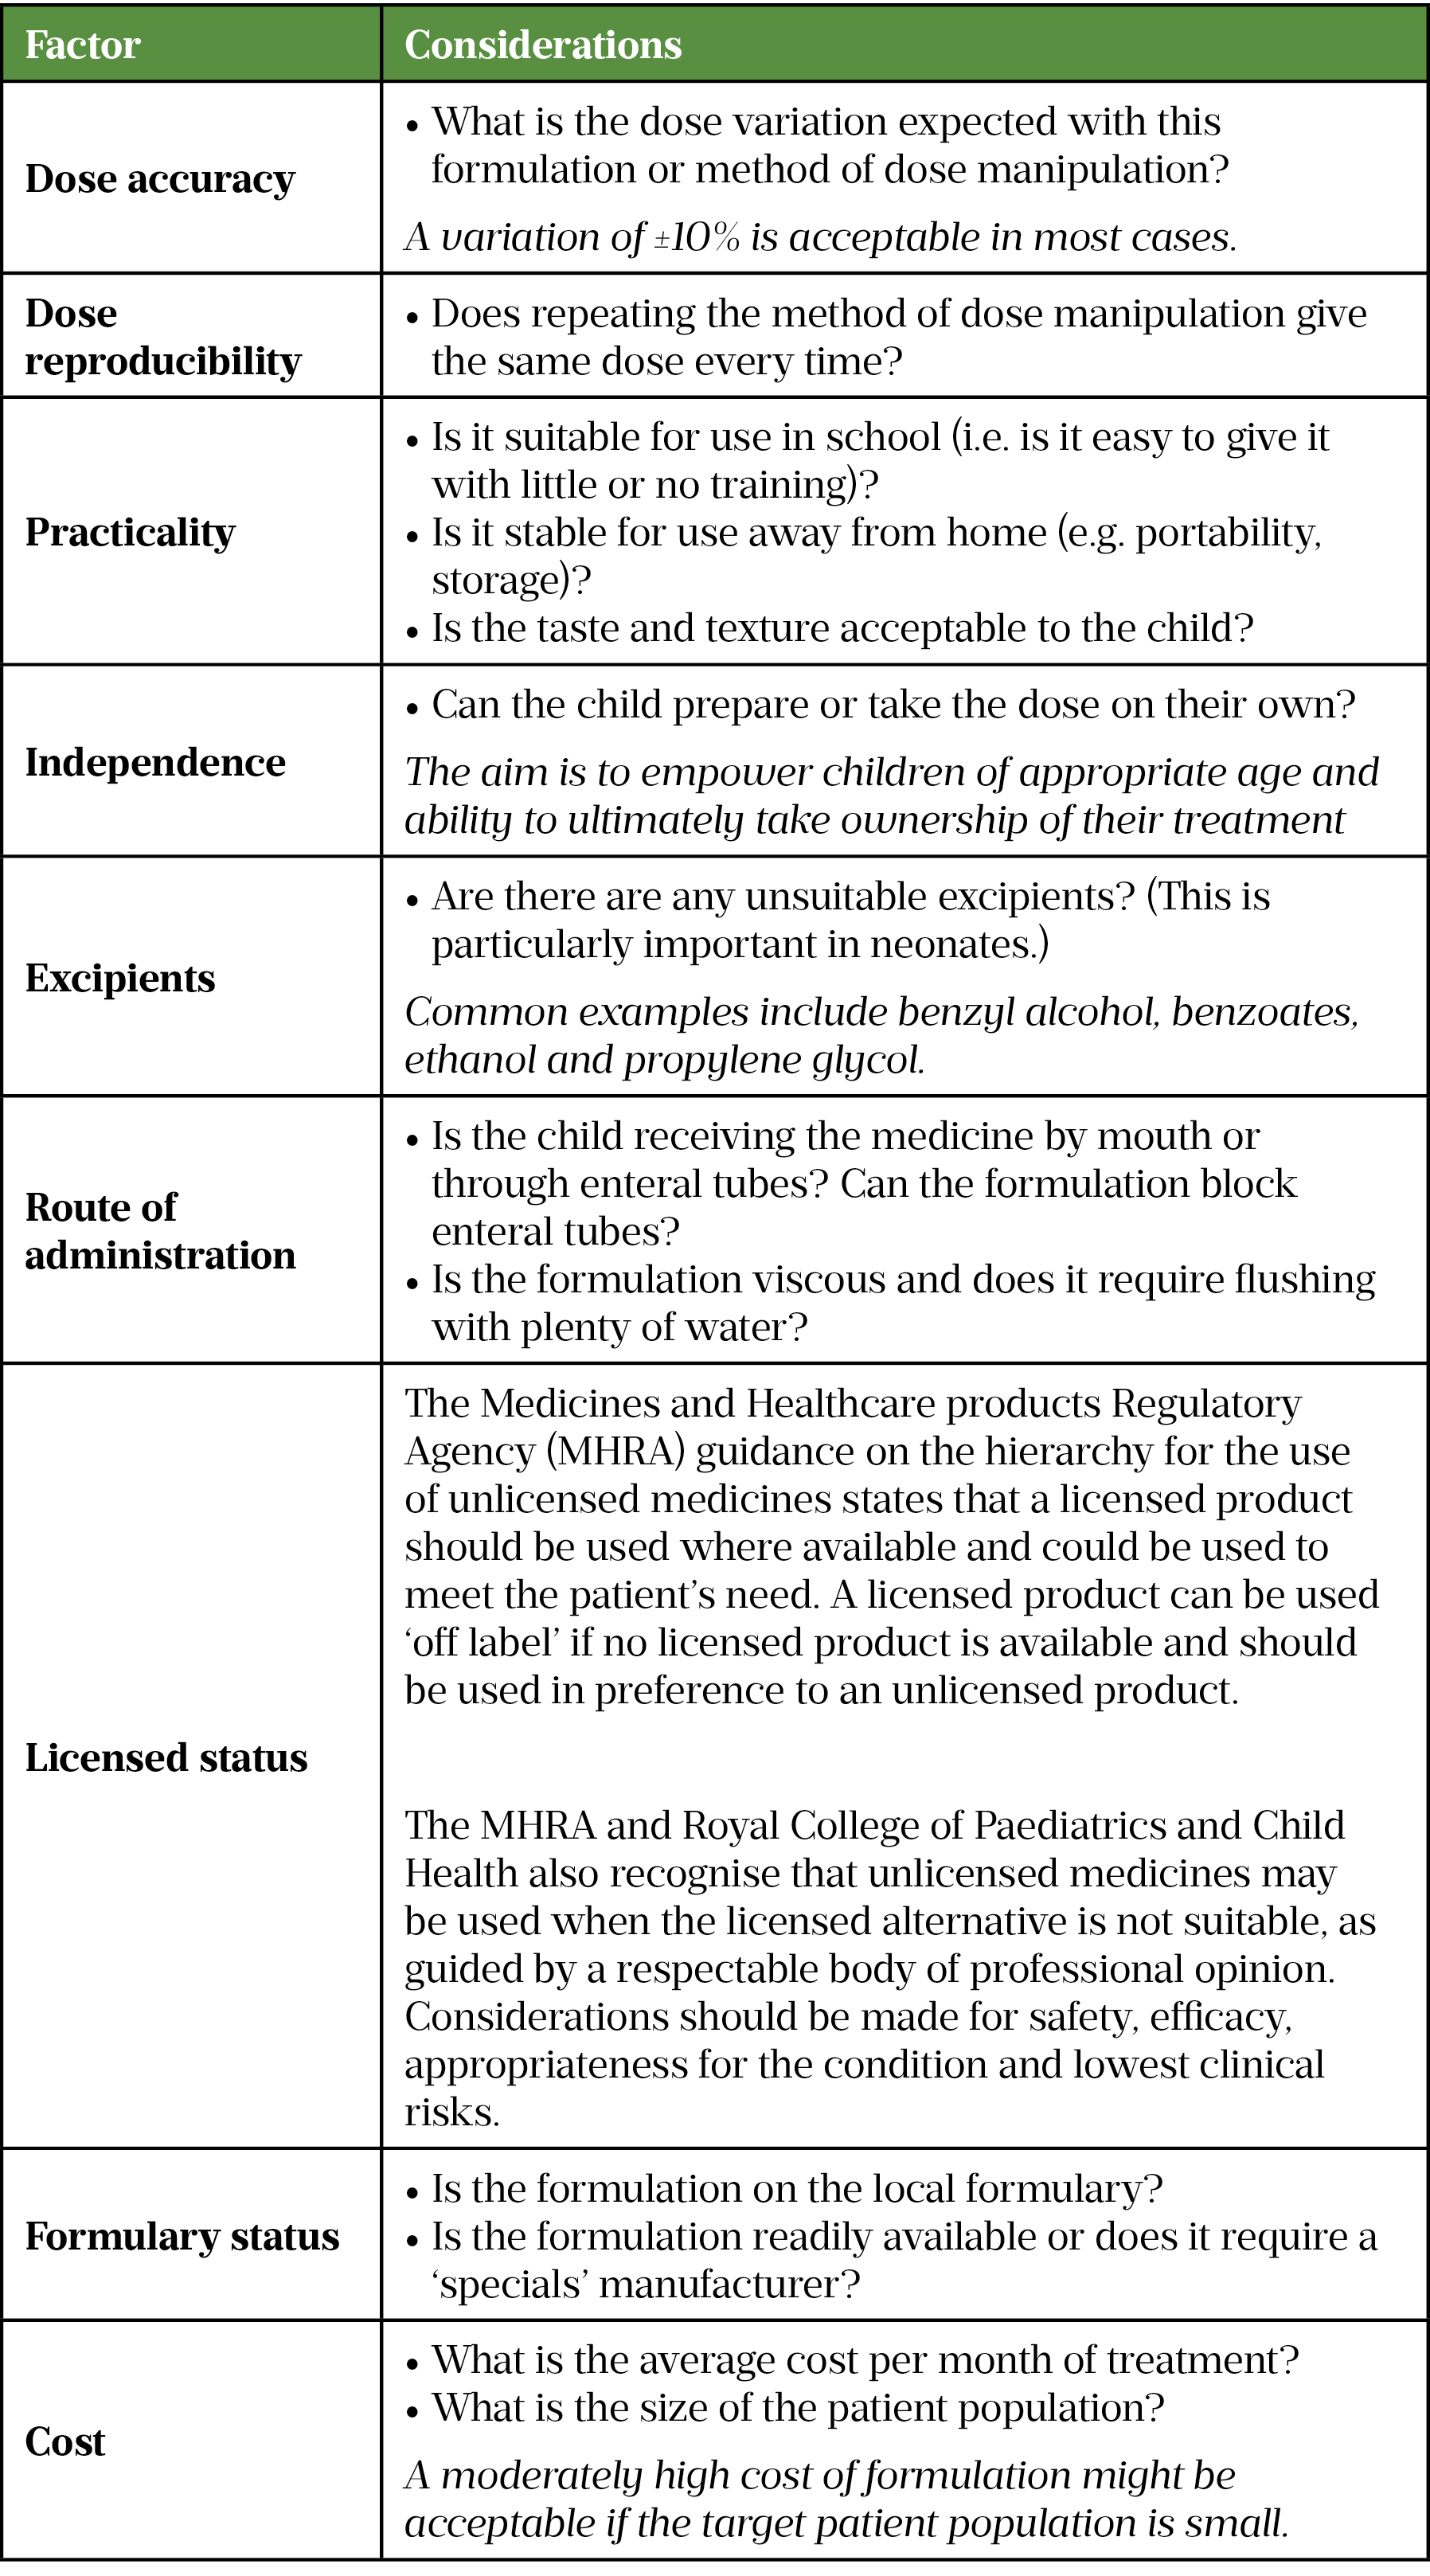 Table 1: Factors to consider when choosing an oral hydrocortisone formulation for children​[8,9]​